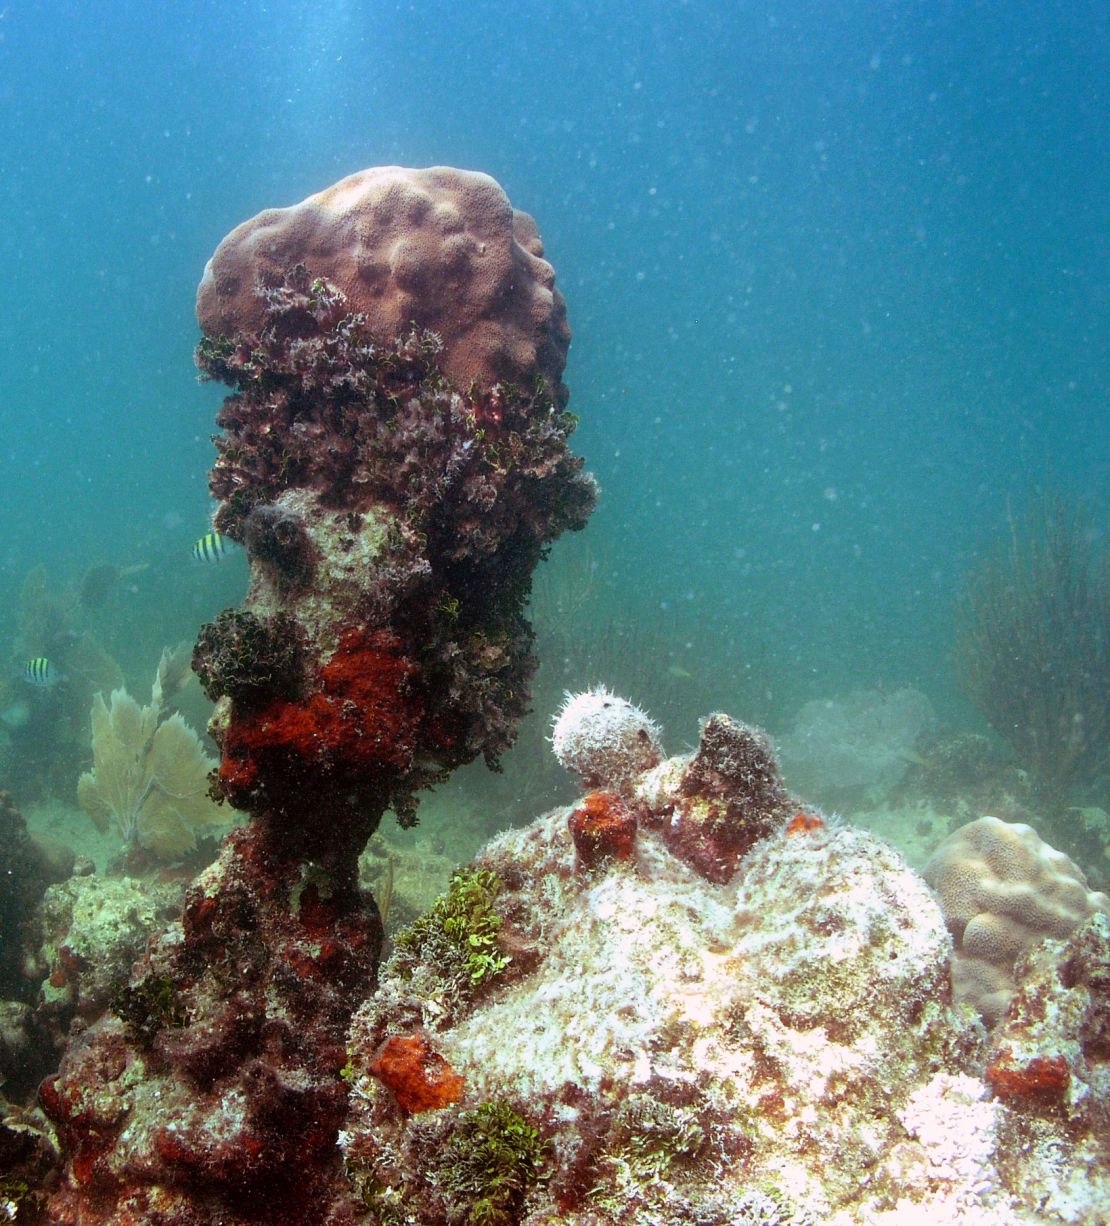 A reef with little living coral and extensive bioerosion in the Florida Keys.